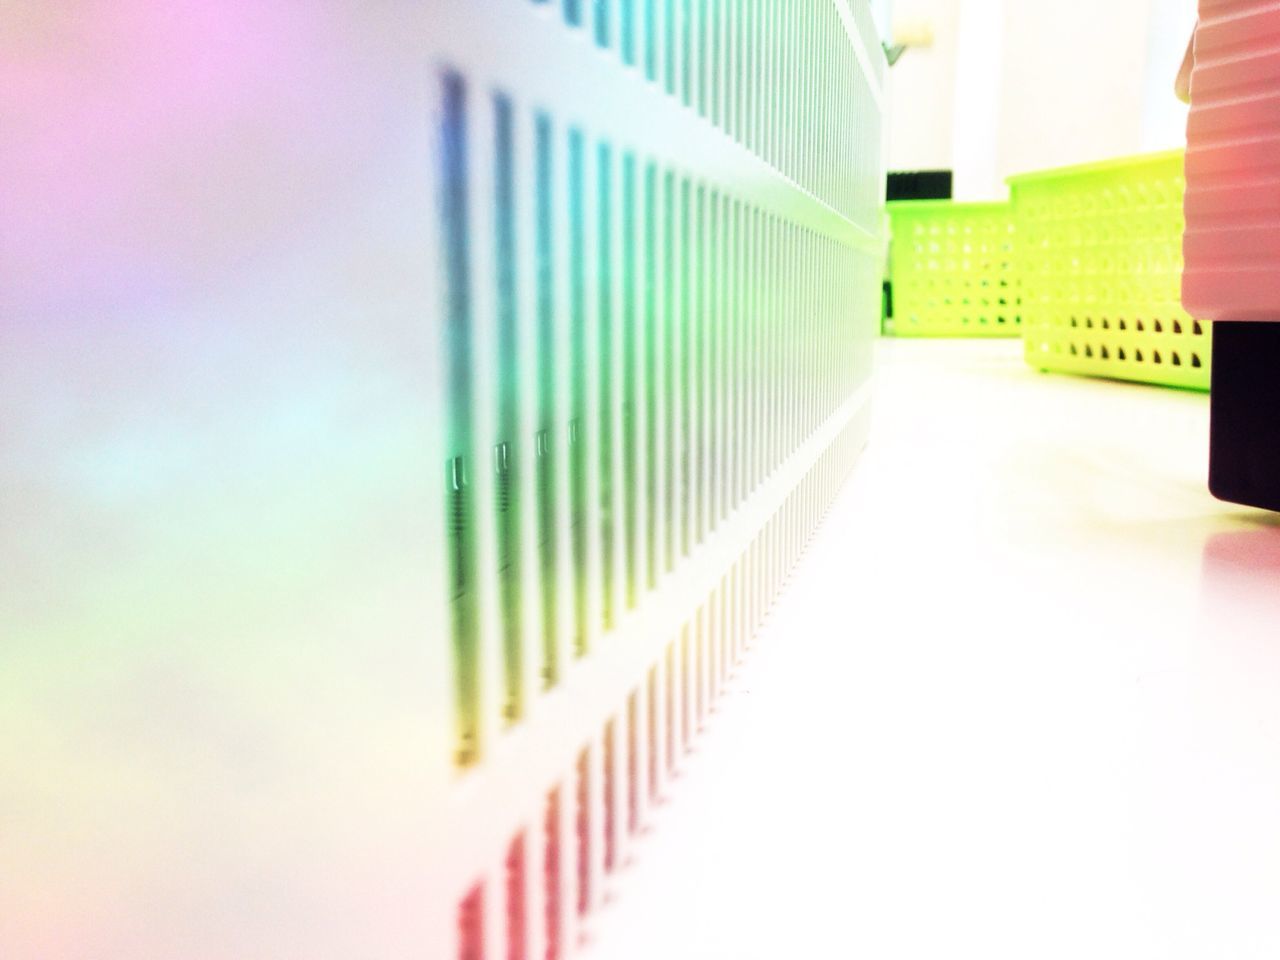 in a row, indoors, multi colored, architecture, built structure, education, no people, repetition, close-up, order, modern, copy space, pattern, building exterior, day, large group of objects, low angle view, book, colorful, green color